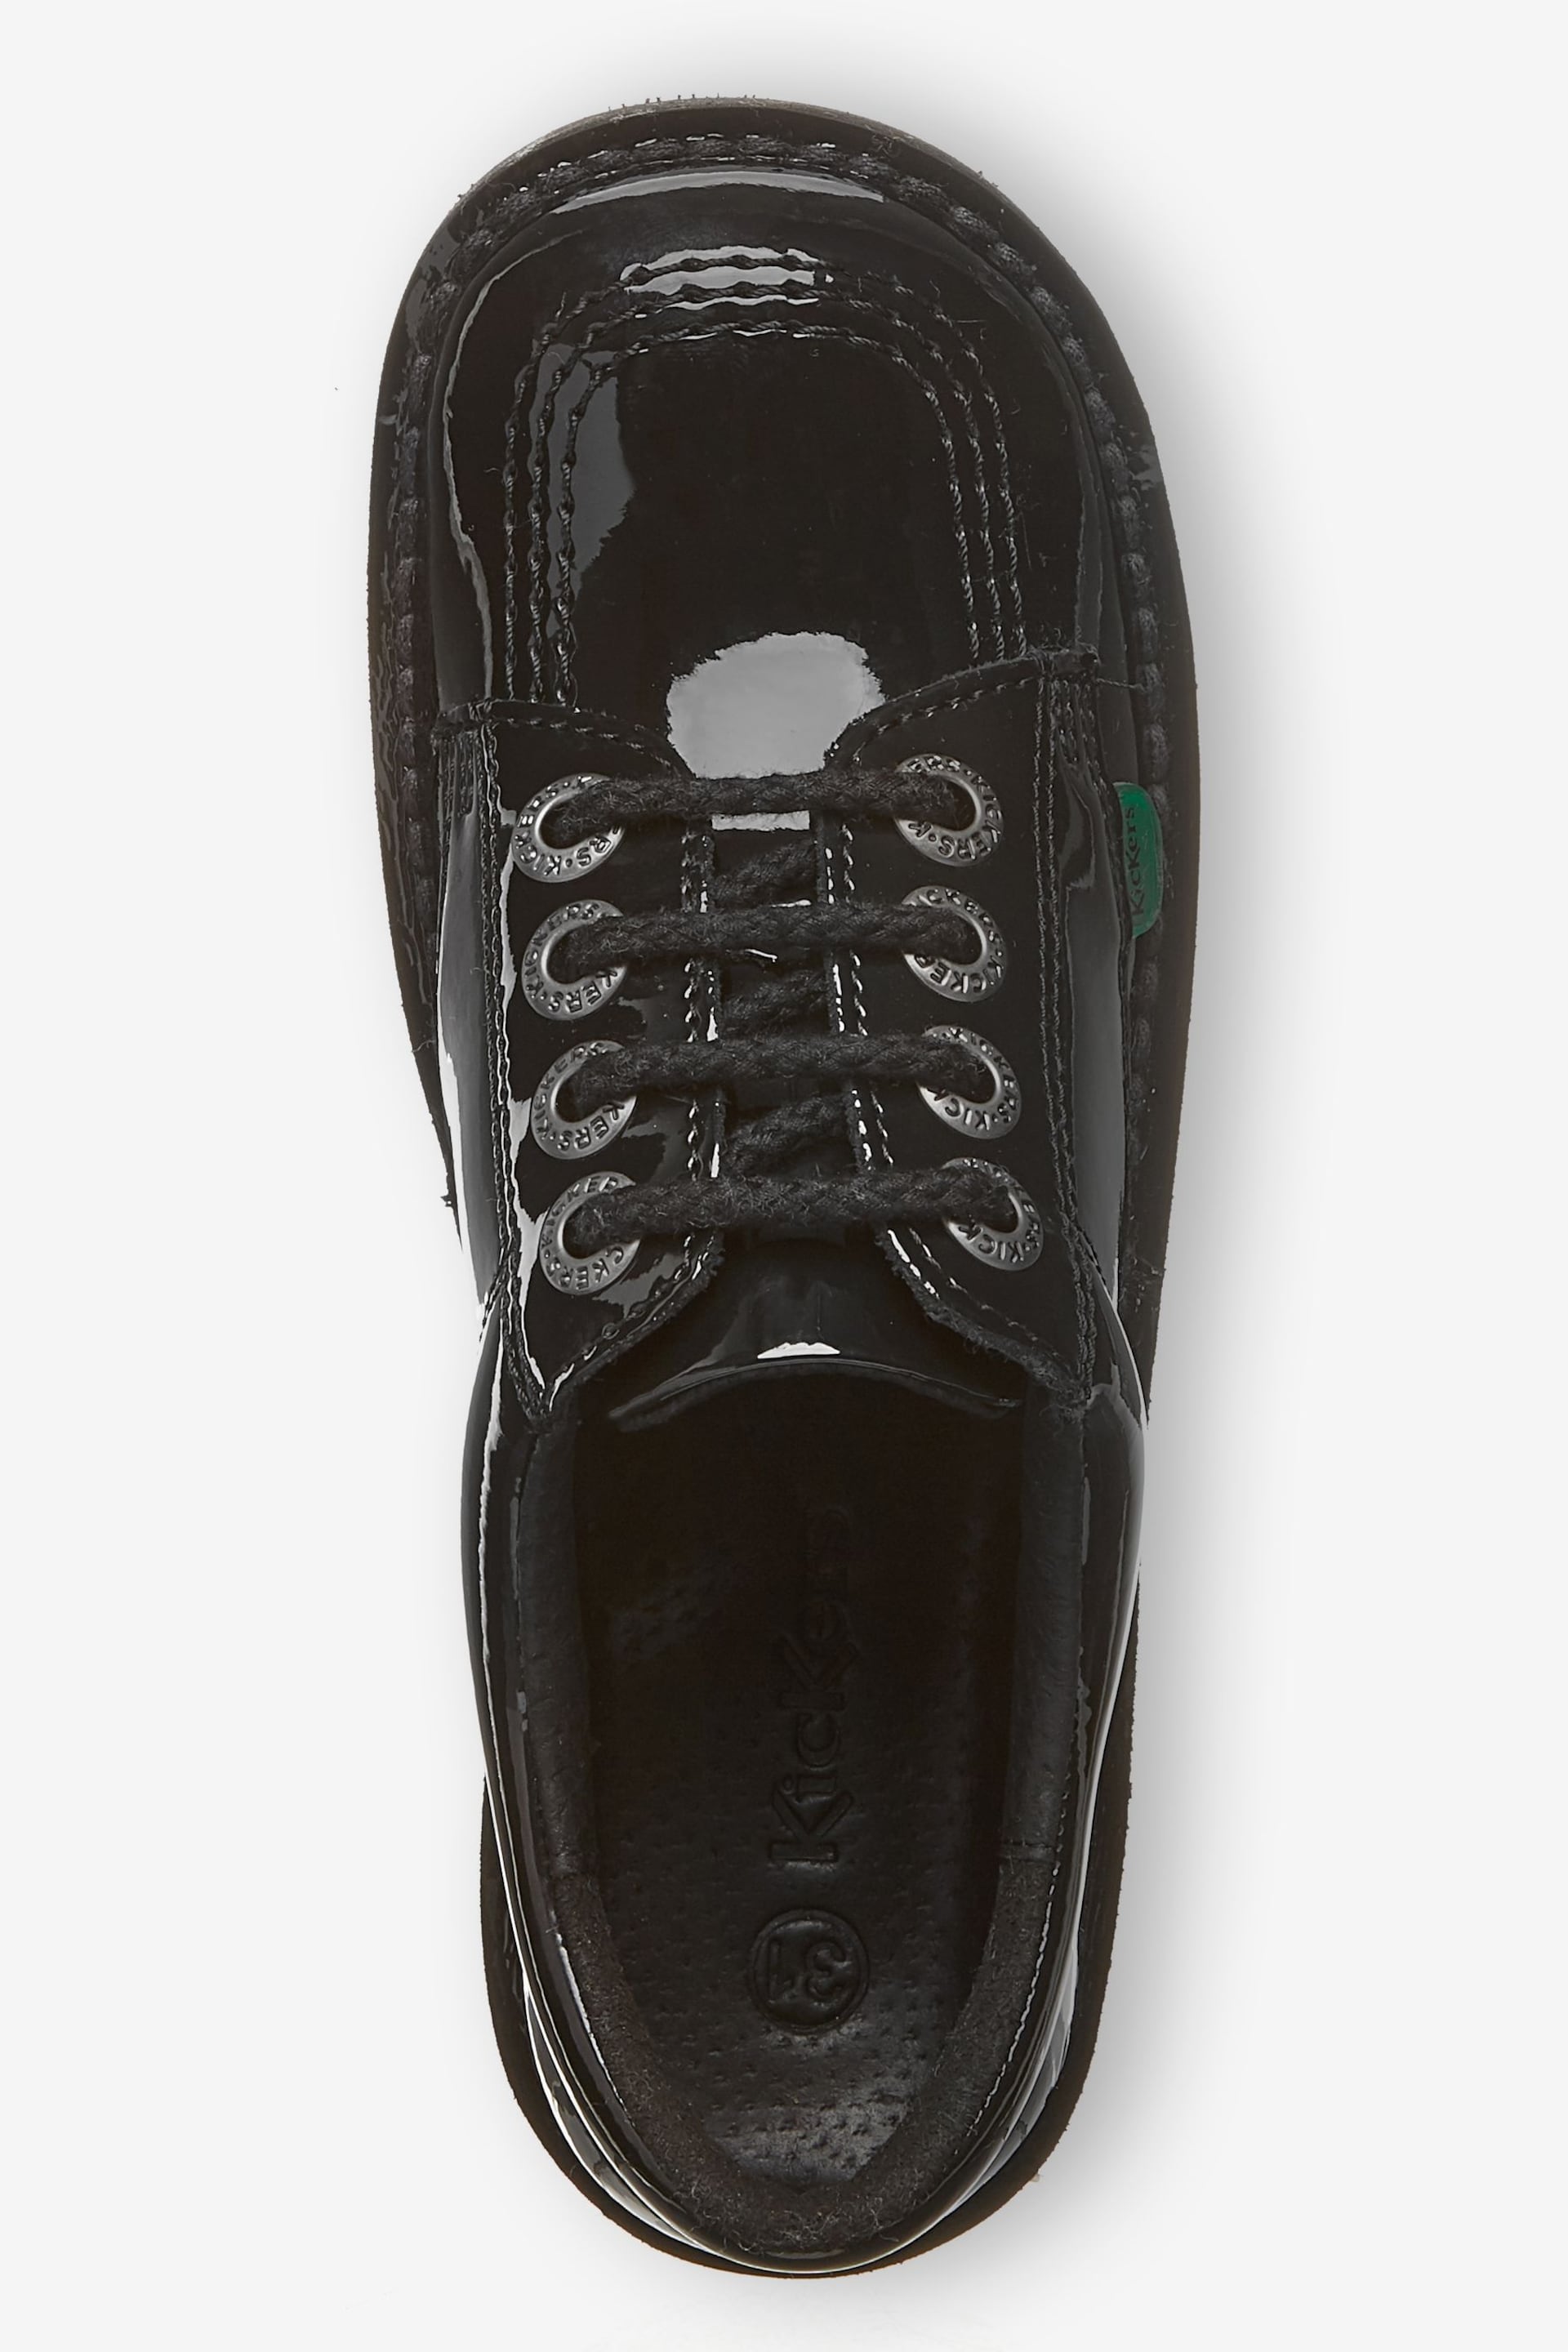 Kickers Youth Kick Lo Patent Leather Black Shoes - Image 2 of 3